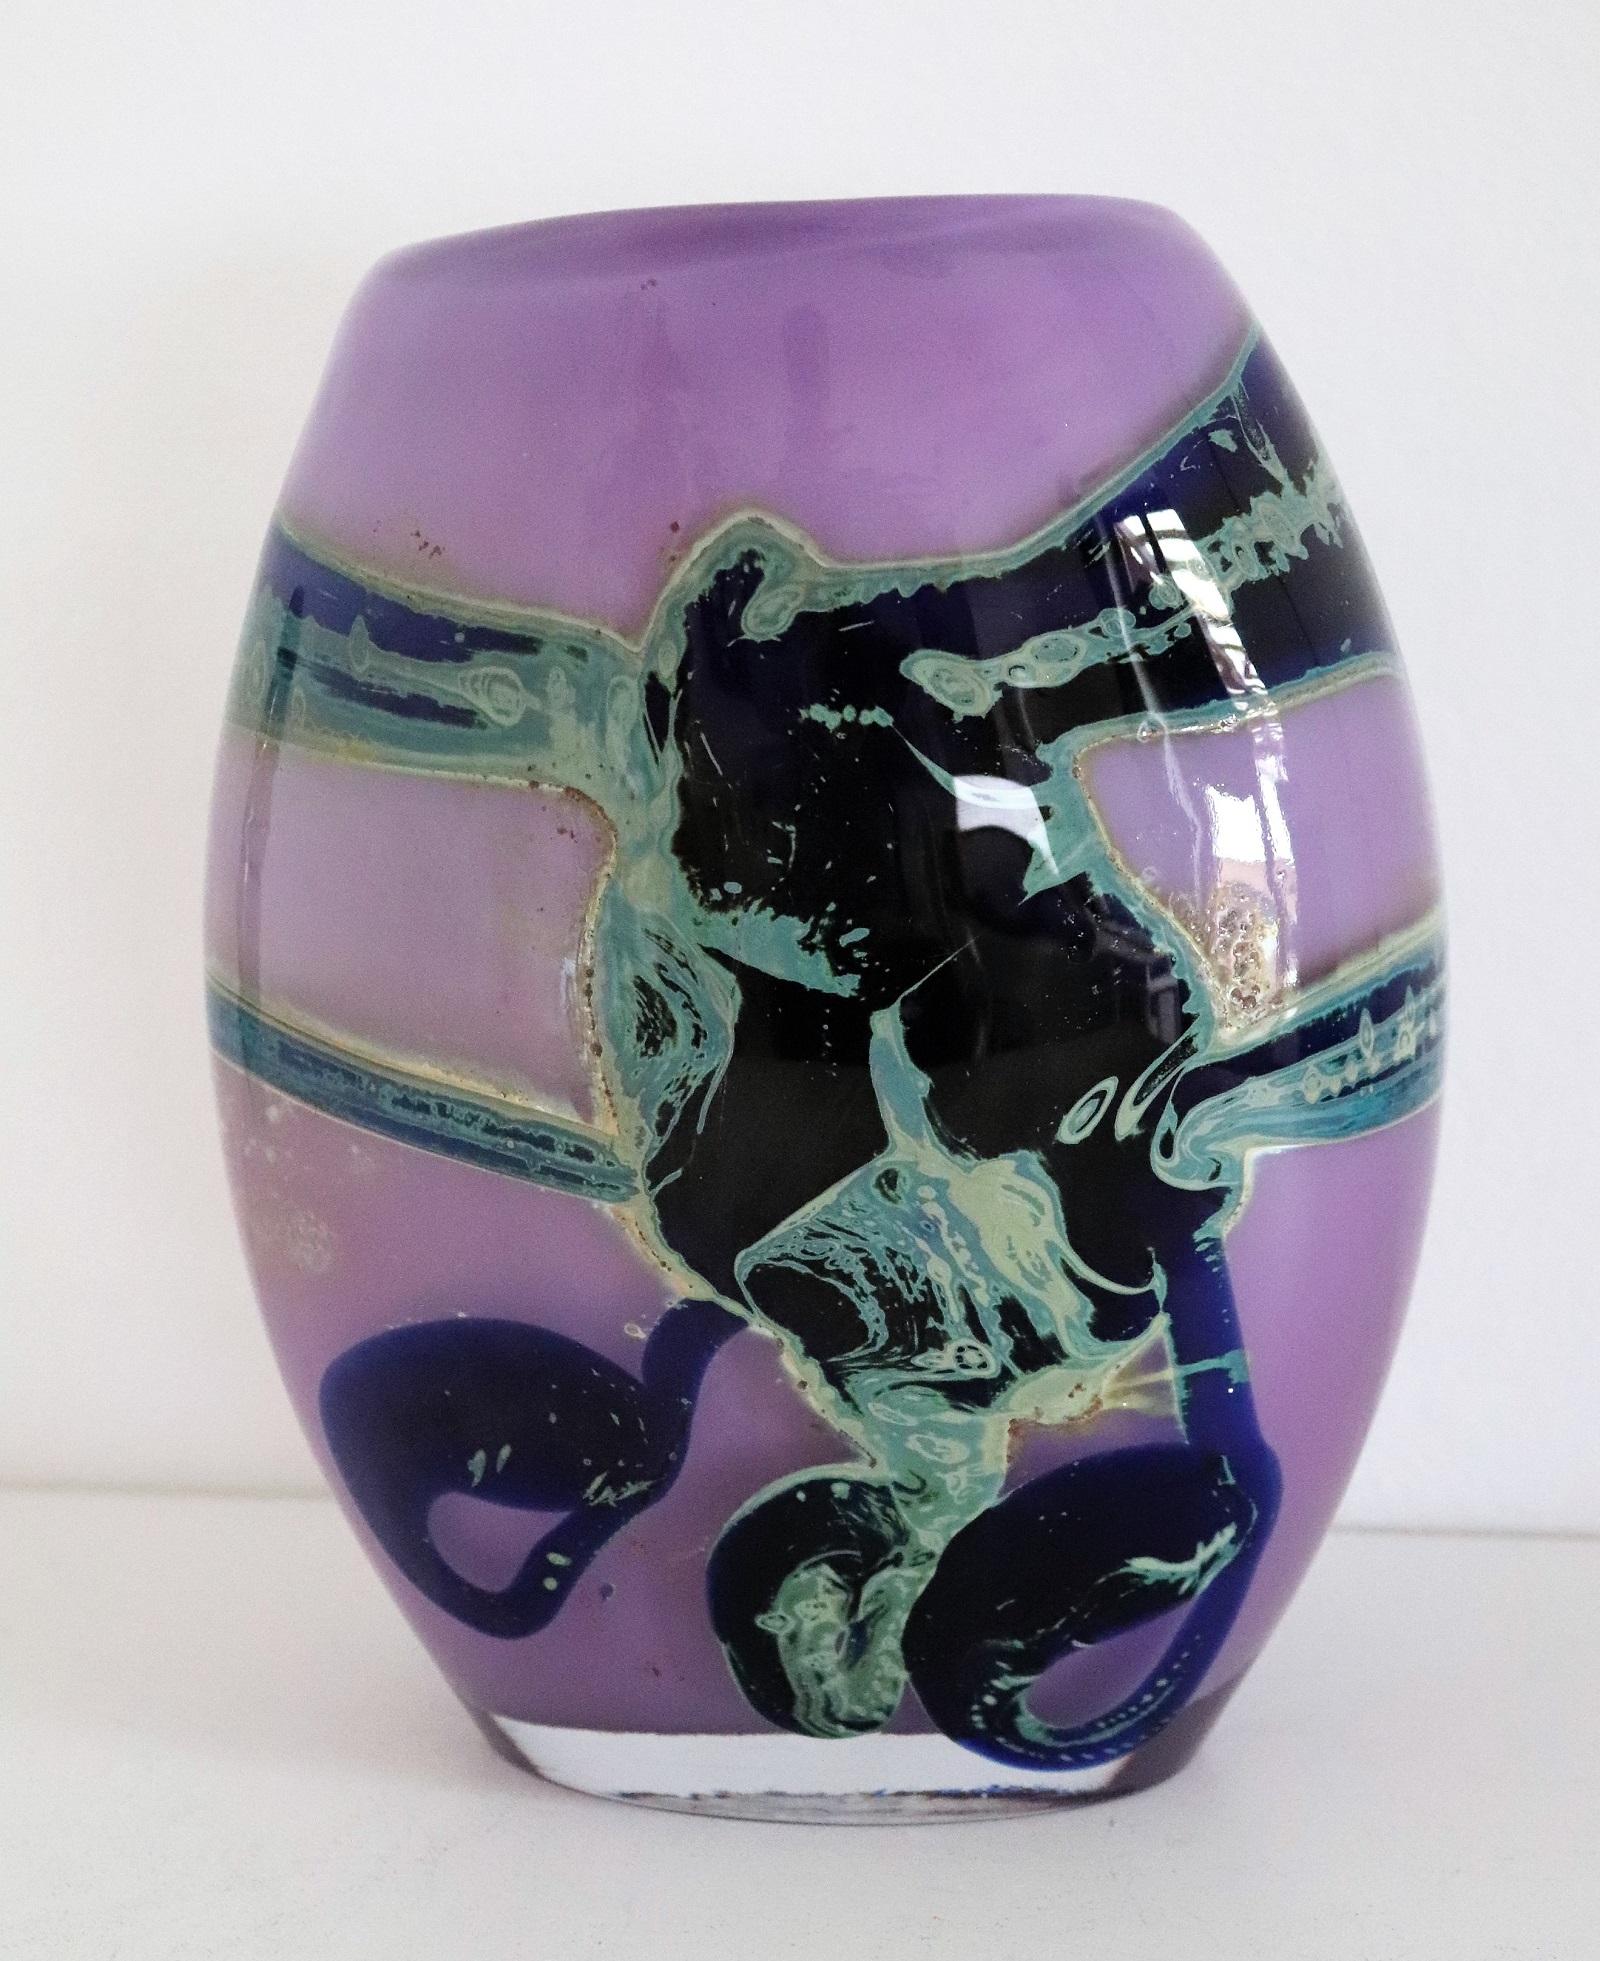 Beautiful art glass vase made by Samuel J. Herman during the early 1970s when he co-operated with Val St. Lambert, Belgium.
Signed from the artist under the vase ( see picture)
The vase is in mint condition and shows stunning shiny colors and a